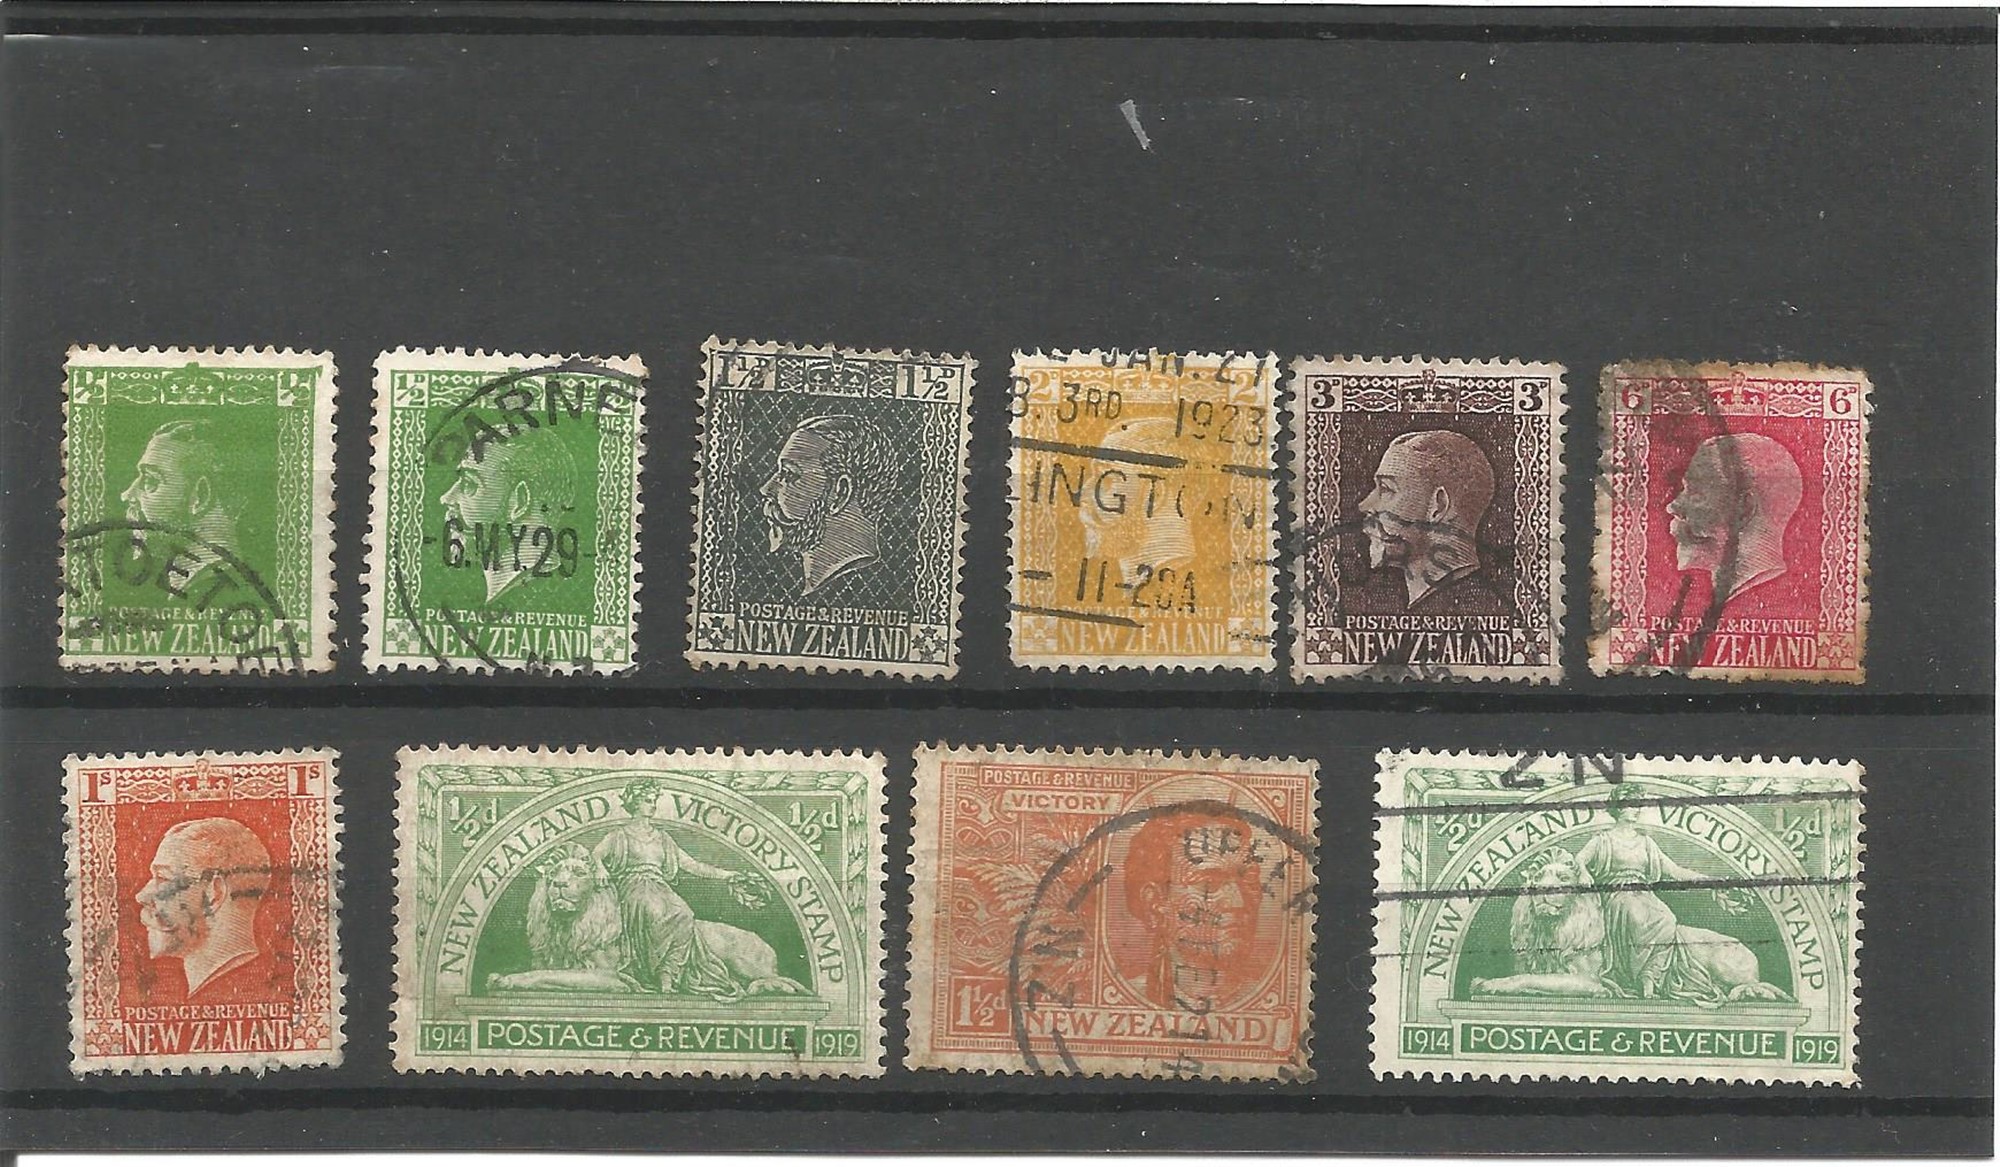 New Zealand pre 1915 stamps on stockcard. 10 stamps. Good condition. We combine postage on - Image 3 of 3